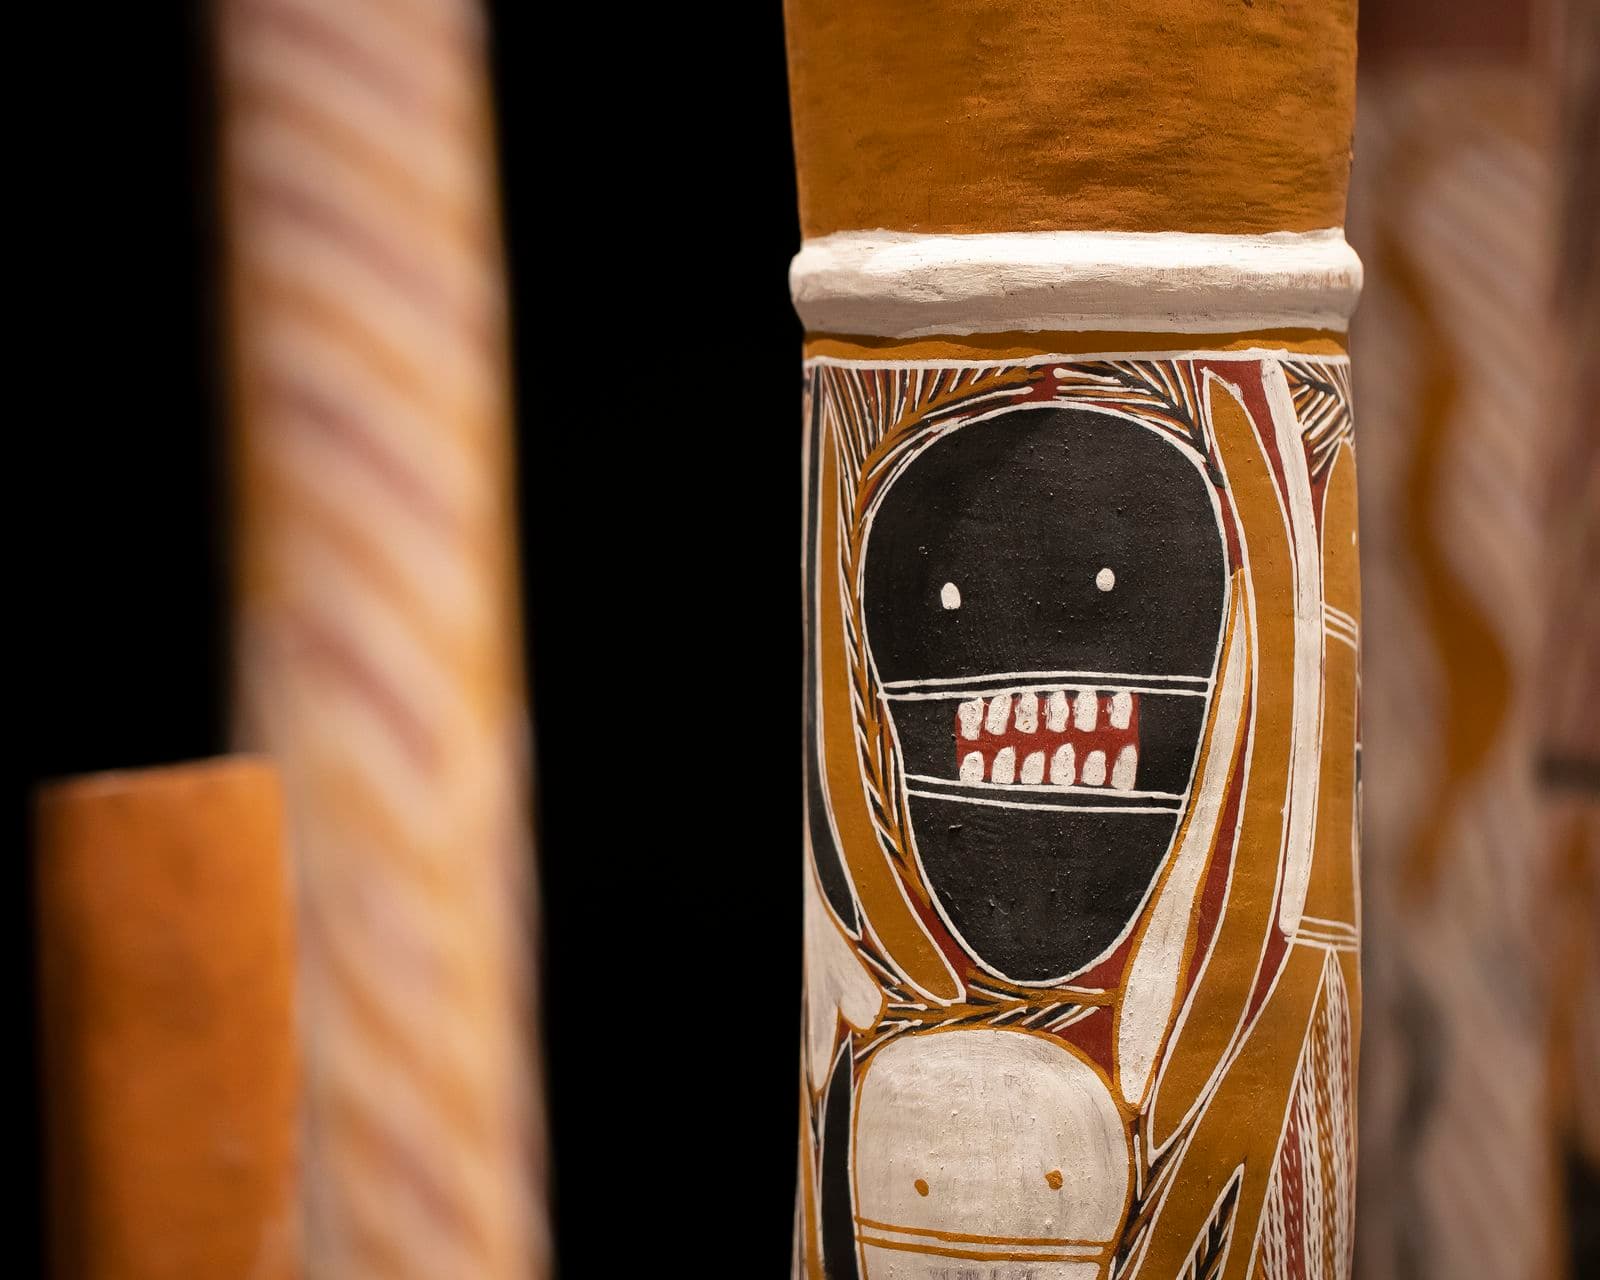 A close-up photograph showing a painted hollow-log. It is part of an installation of 200 painted hollow logs standing upright in a large gallery space. The surrounding walls are painted in a dark colour.